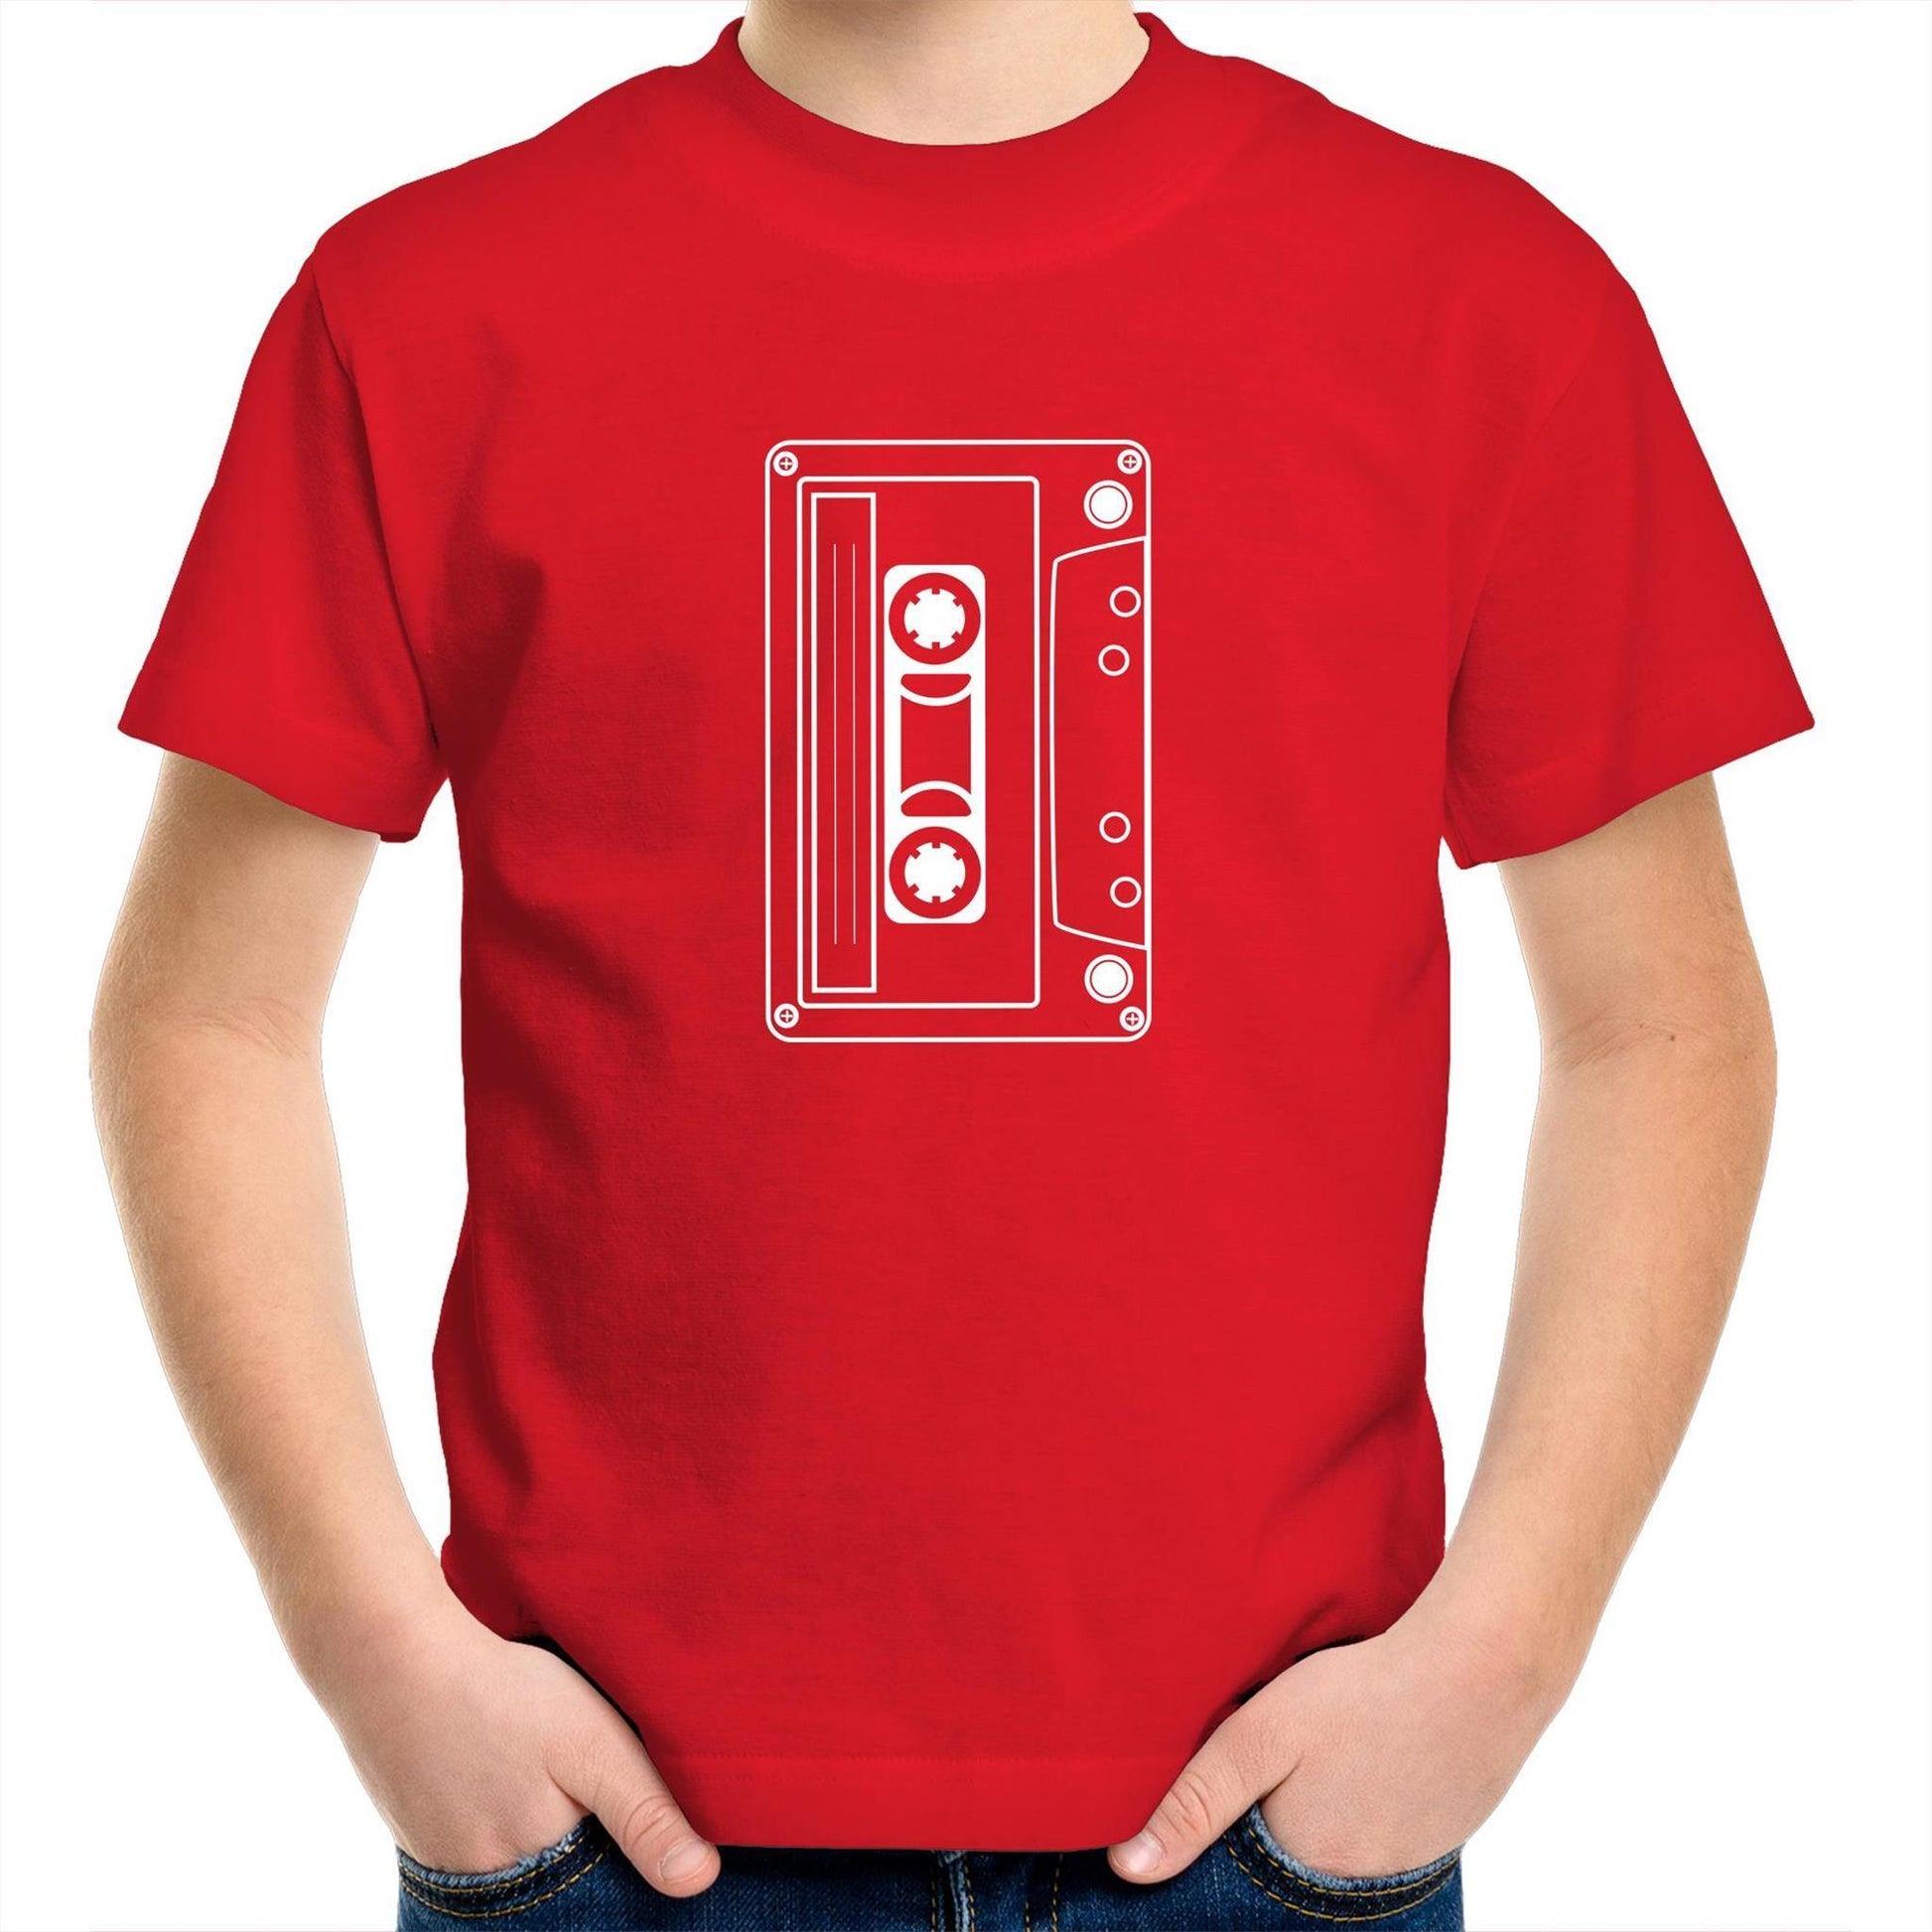 Cassette - Kids Youth Crew T-Shirt Red Kids Youth T-shirt Music Retro